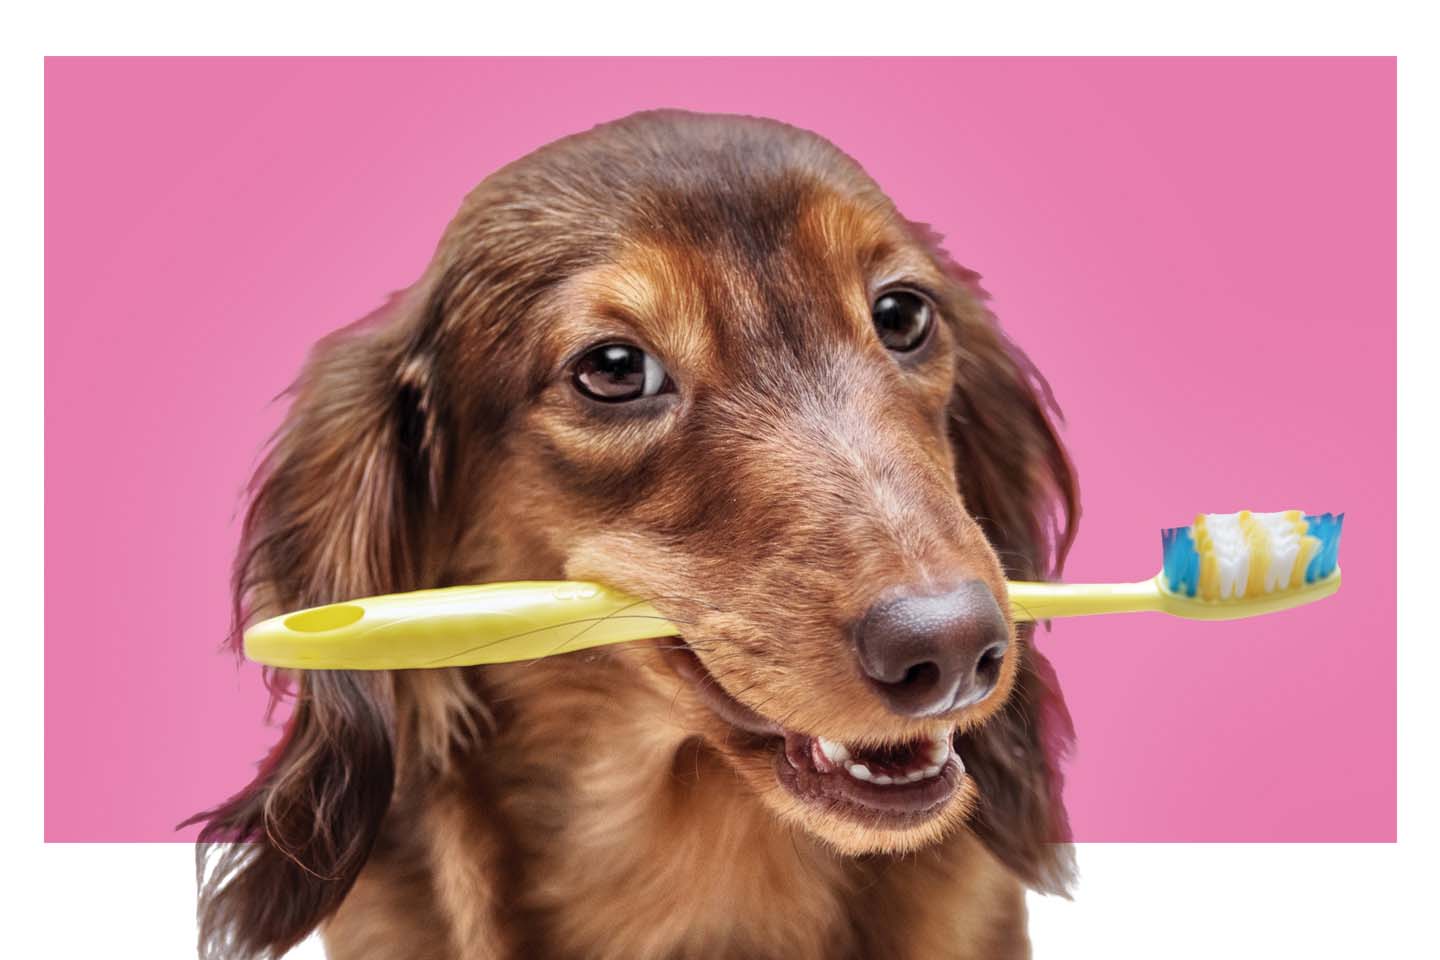 Brown dog with toothbrush in its mouth